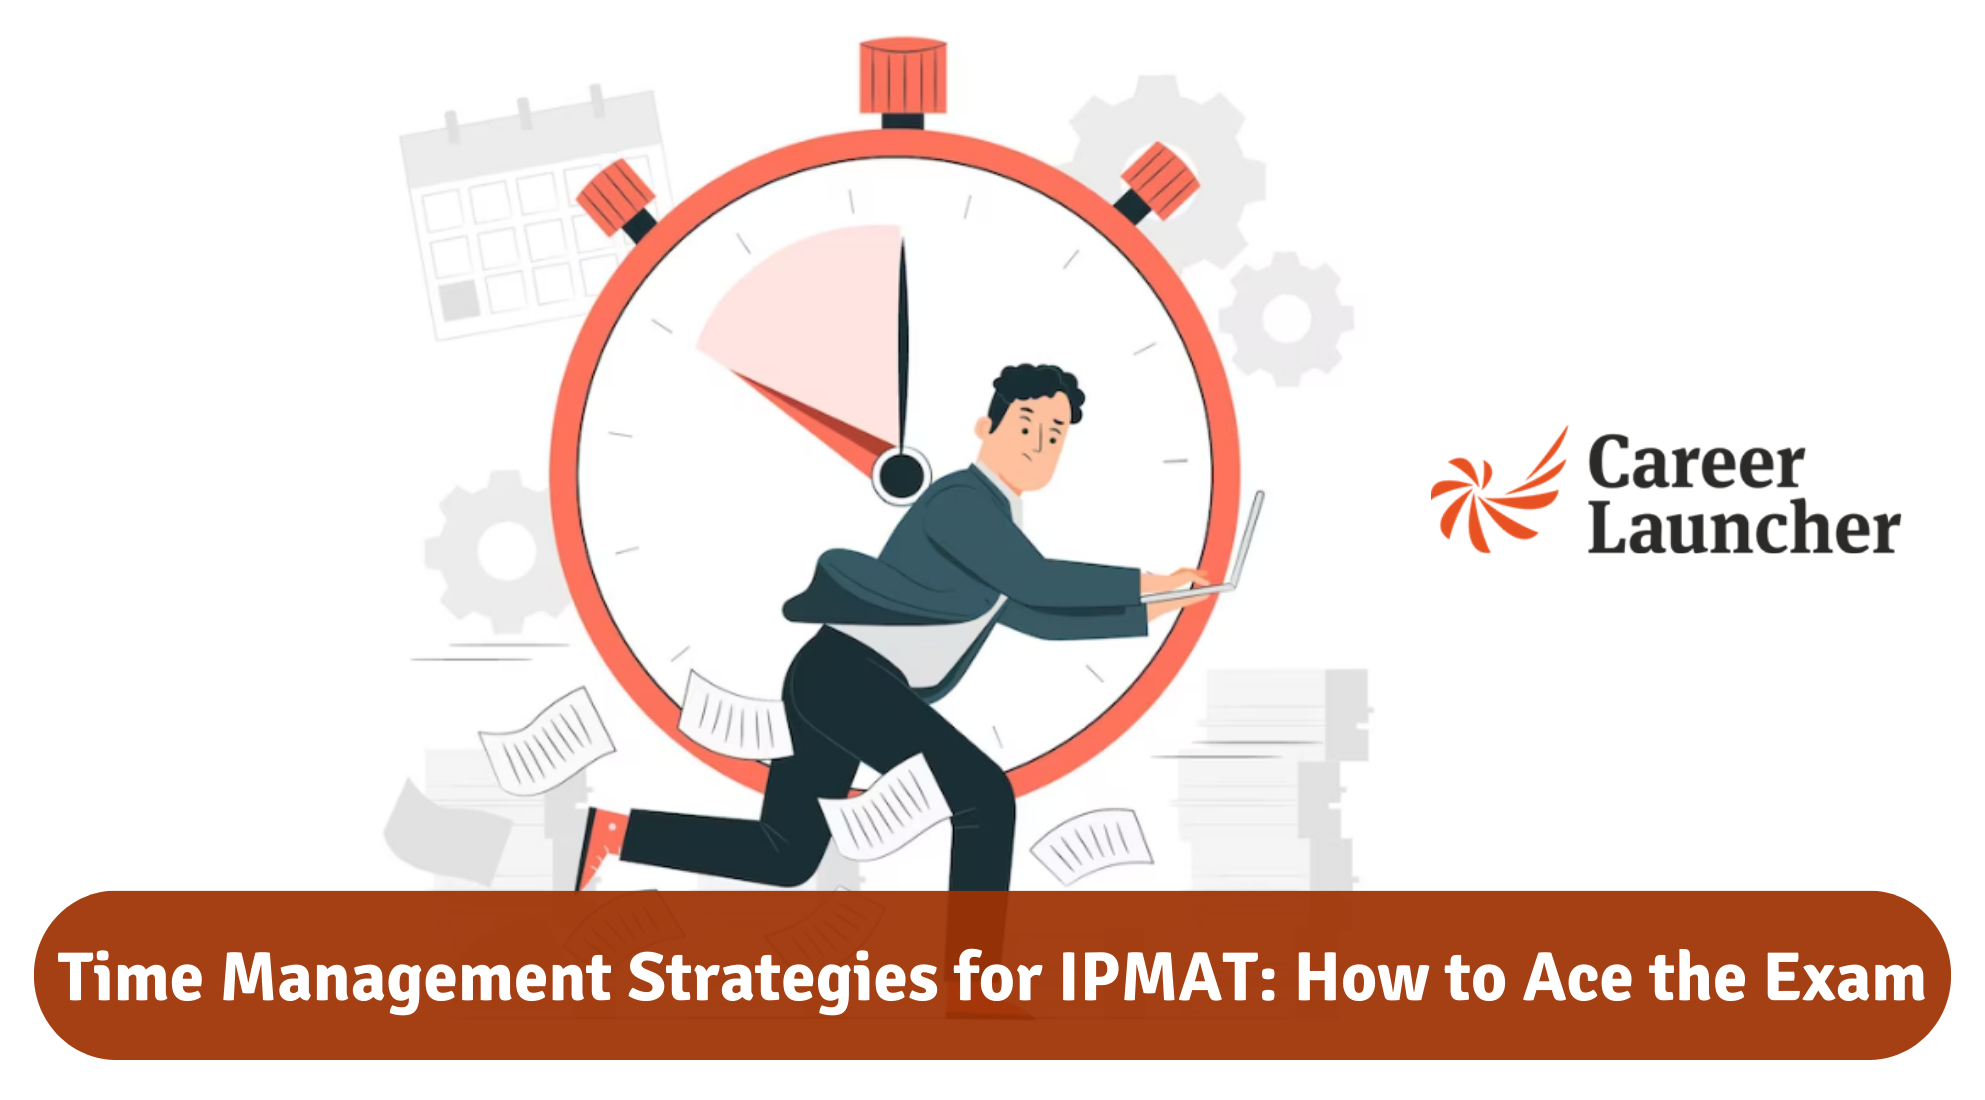 Time Management Strategies for IPMAT: How to Ace the Exam